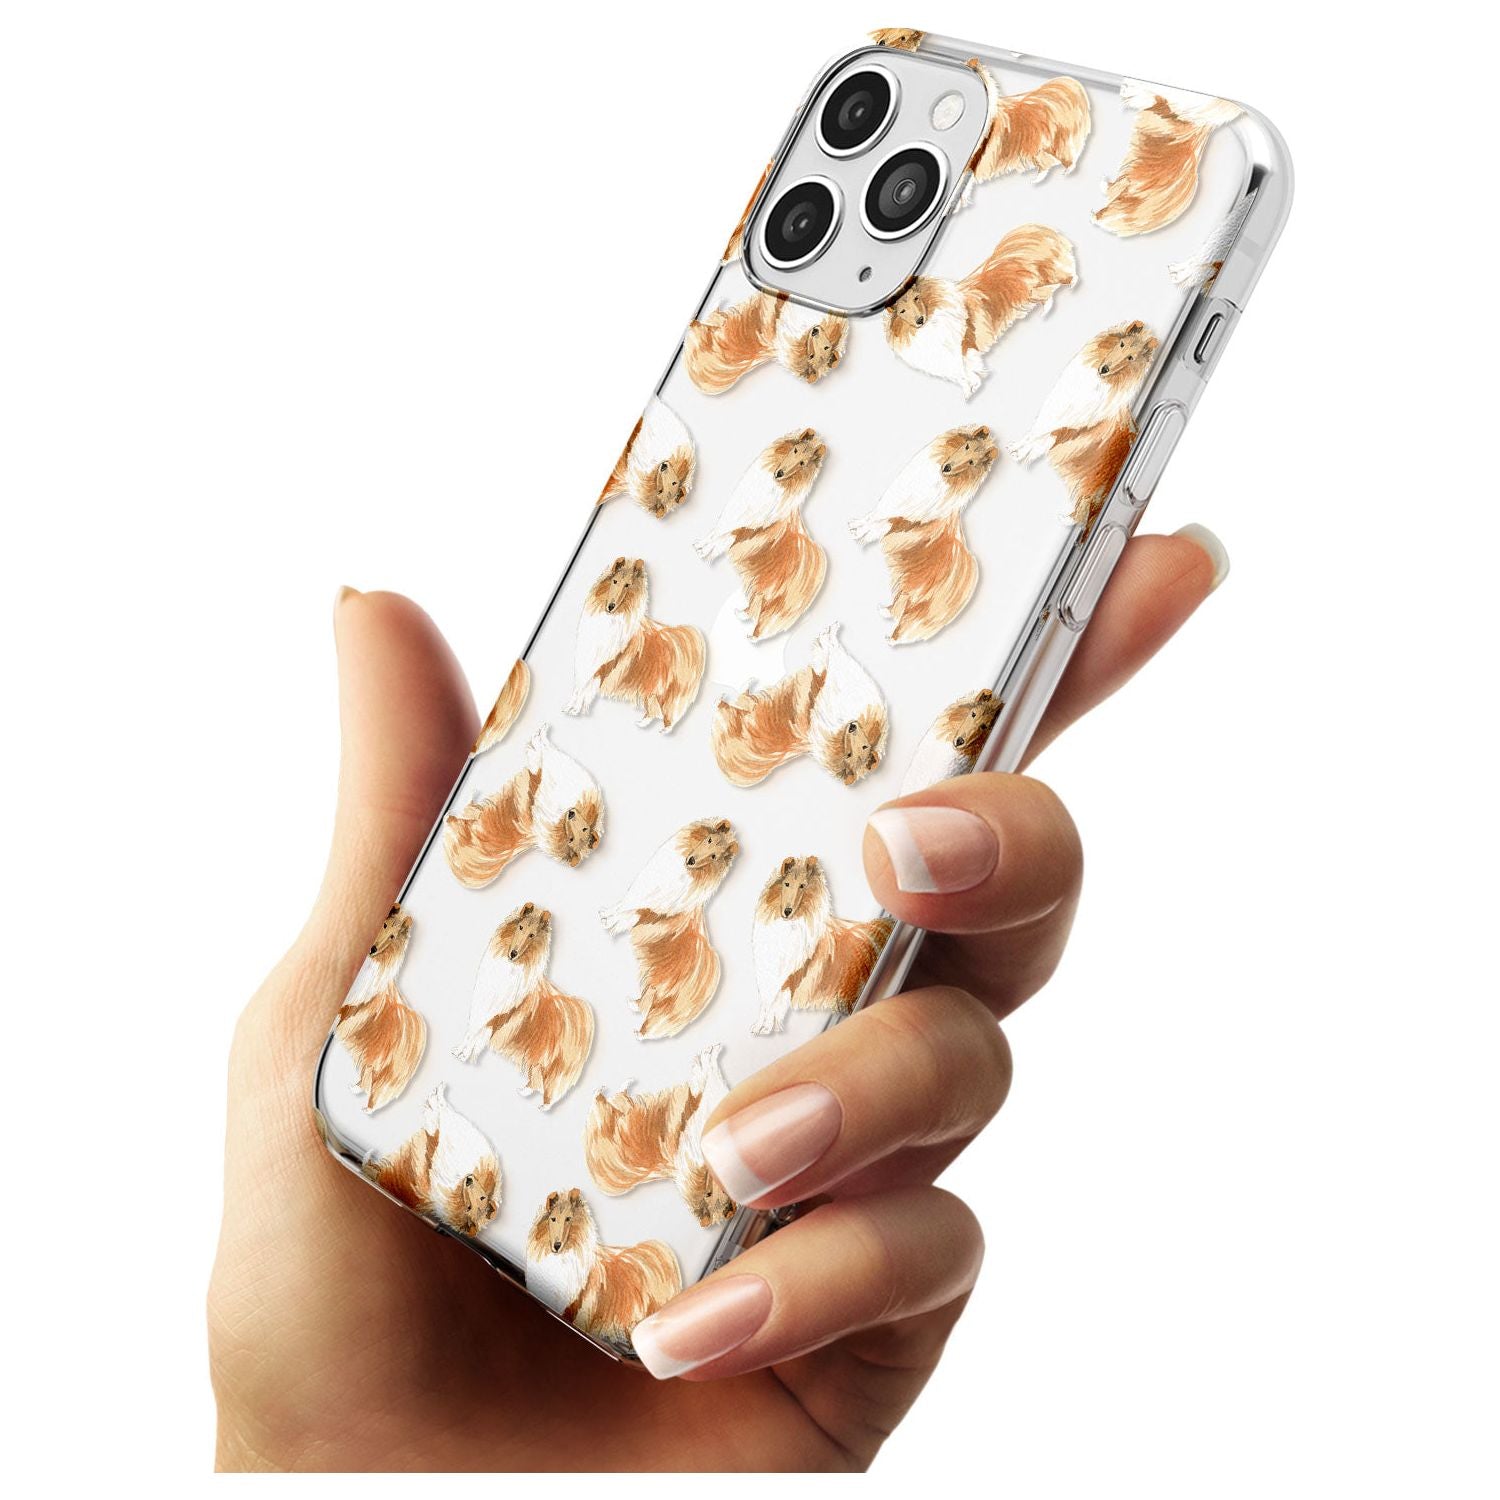 Rough Collie Watercolour Dog Pattern Slim TPU Phone Case for iPhone 11 Pro Max